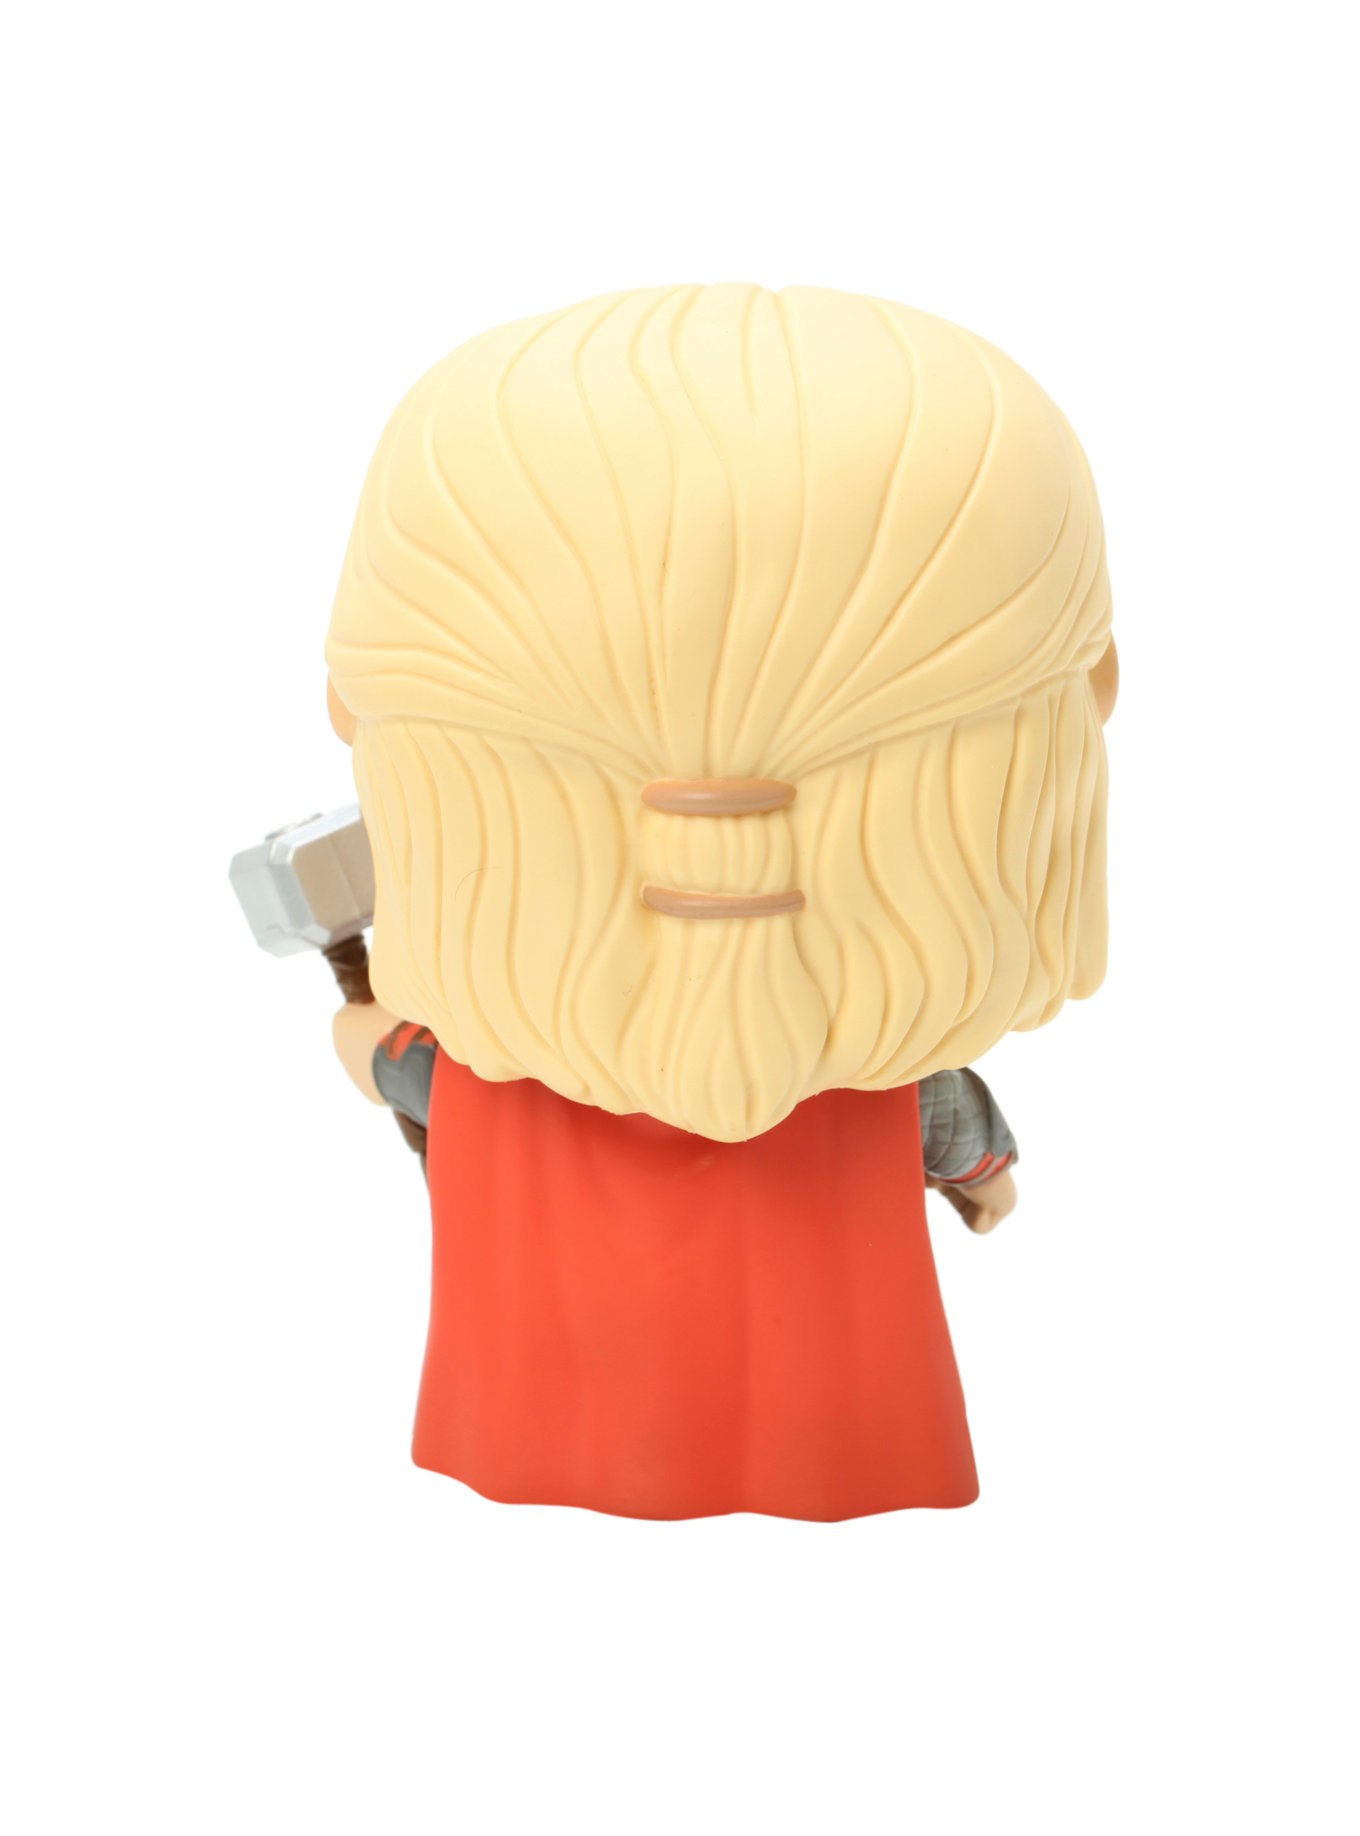 Thor #69 - Avegers Age of Ultron - Funko Pop! Marvel